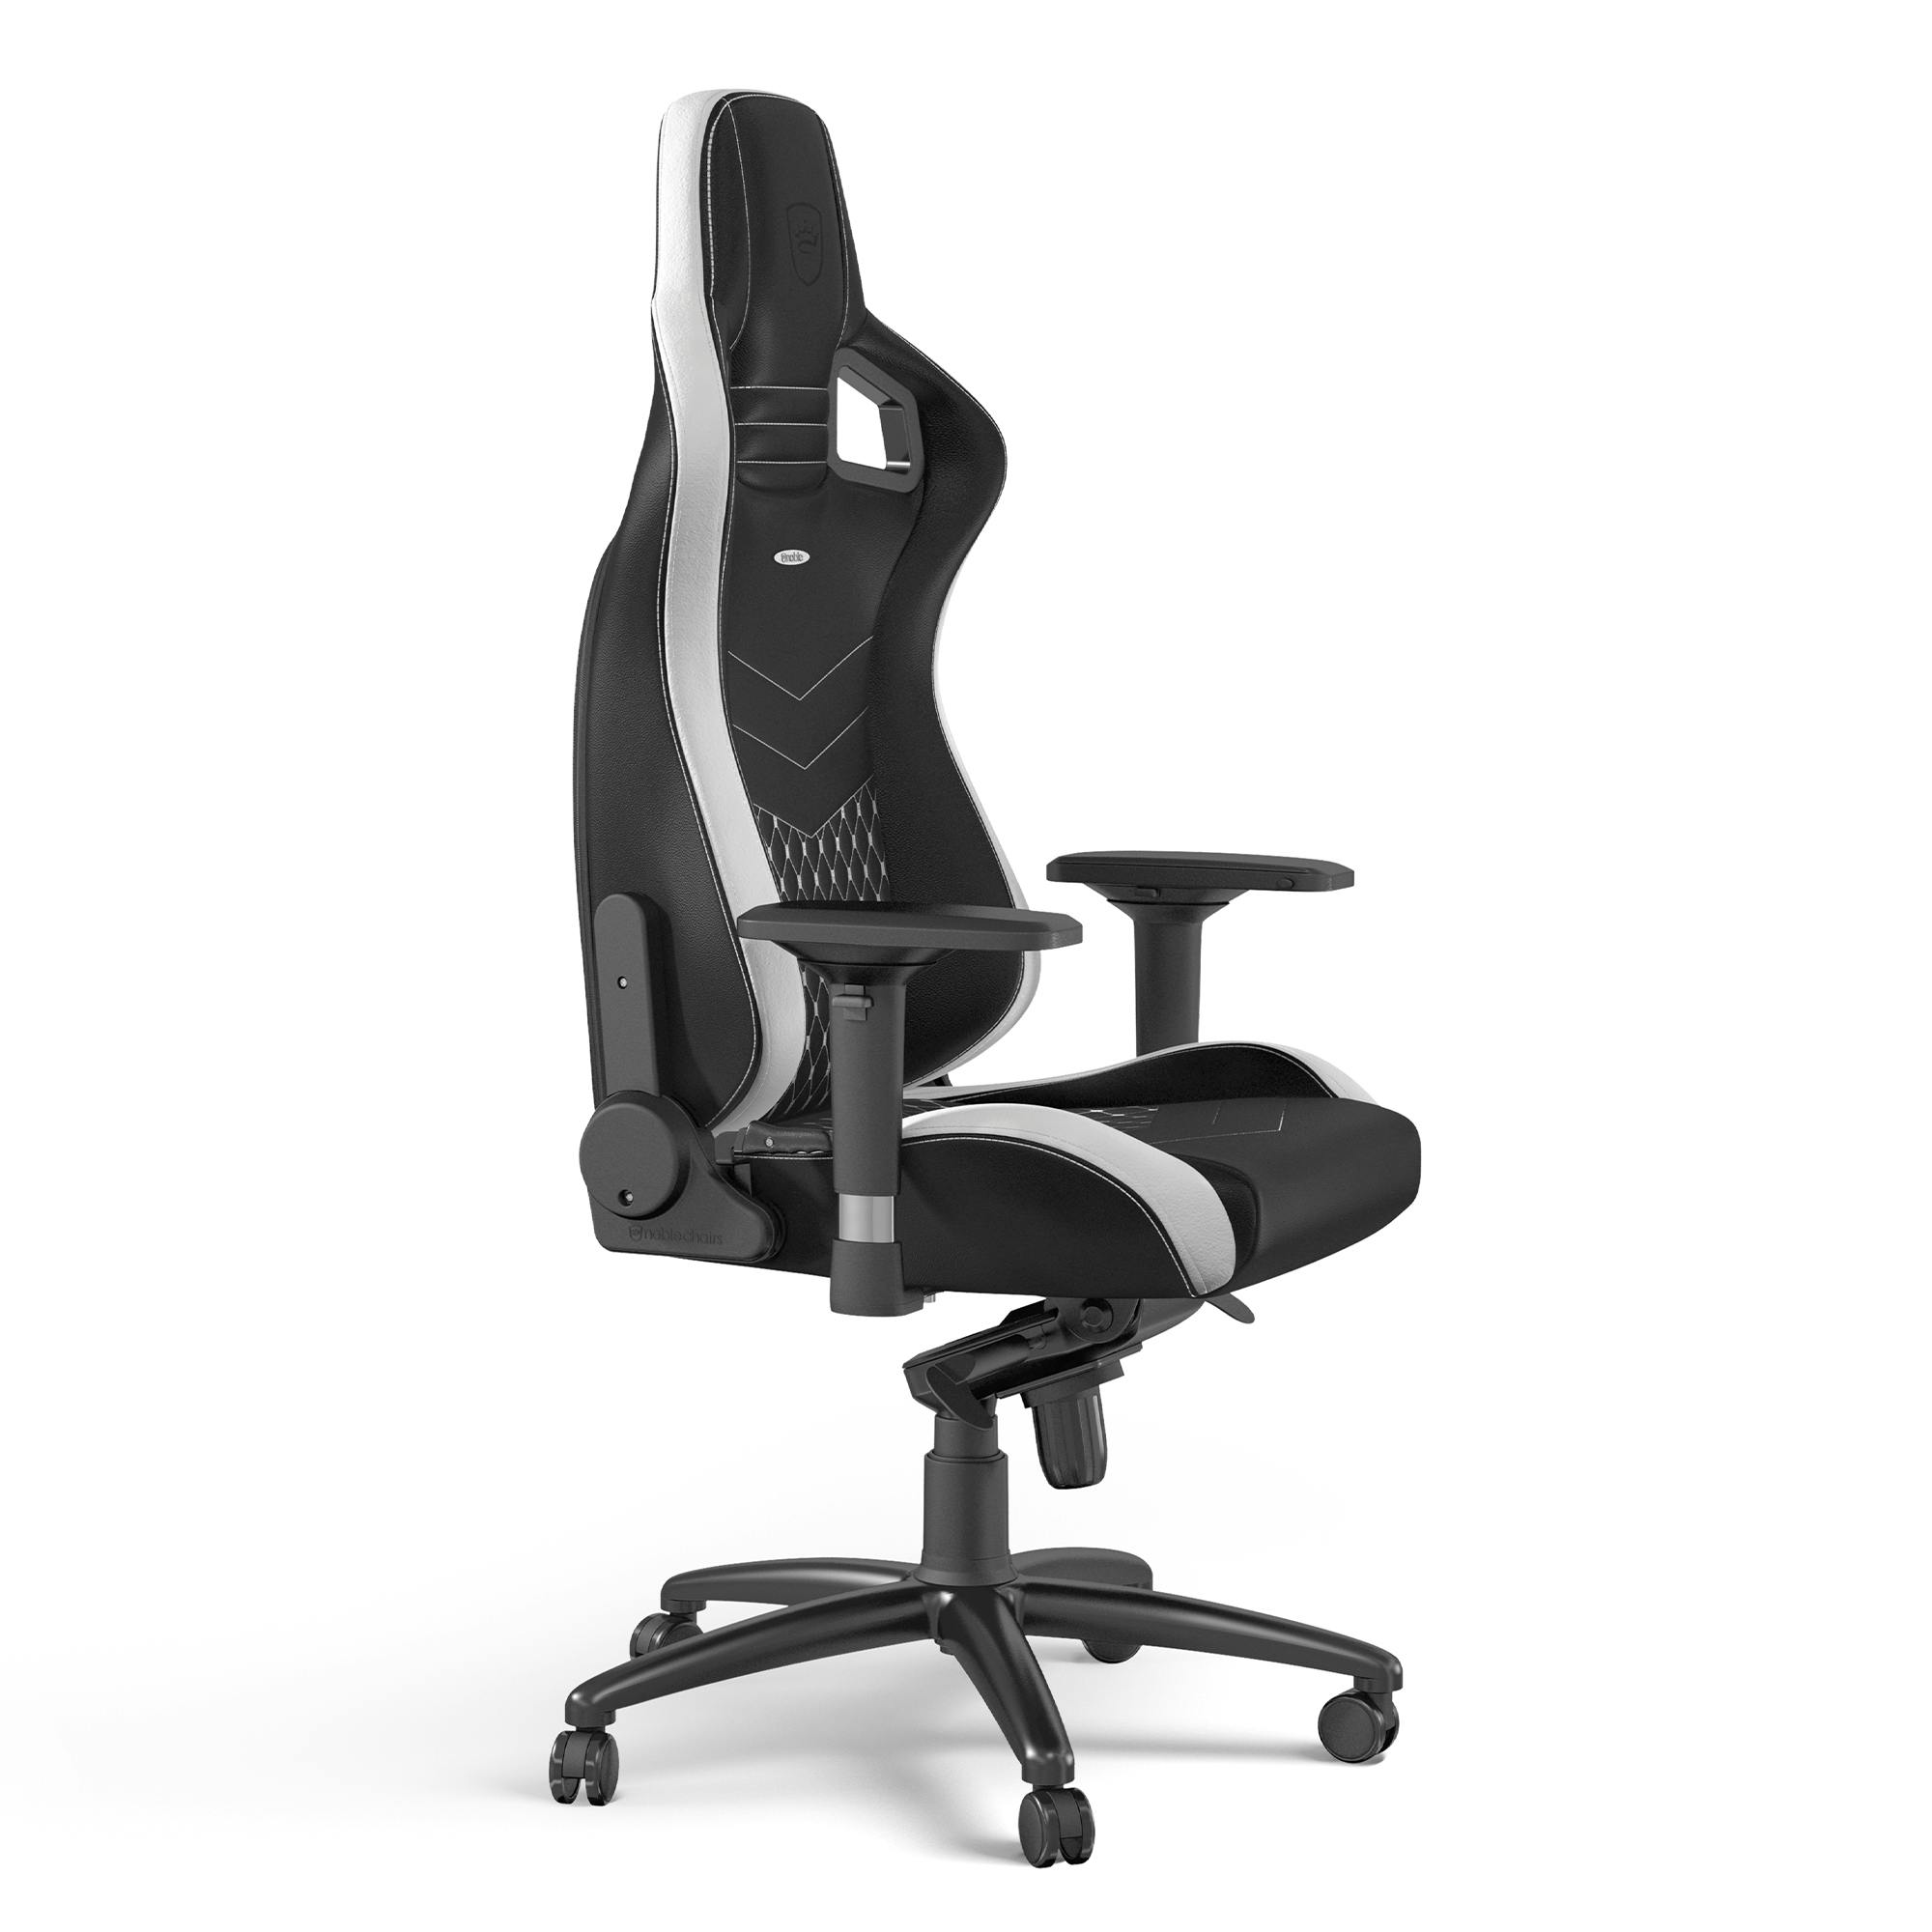 noblechairs - EPIC Real Leather Black / White / Red